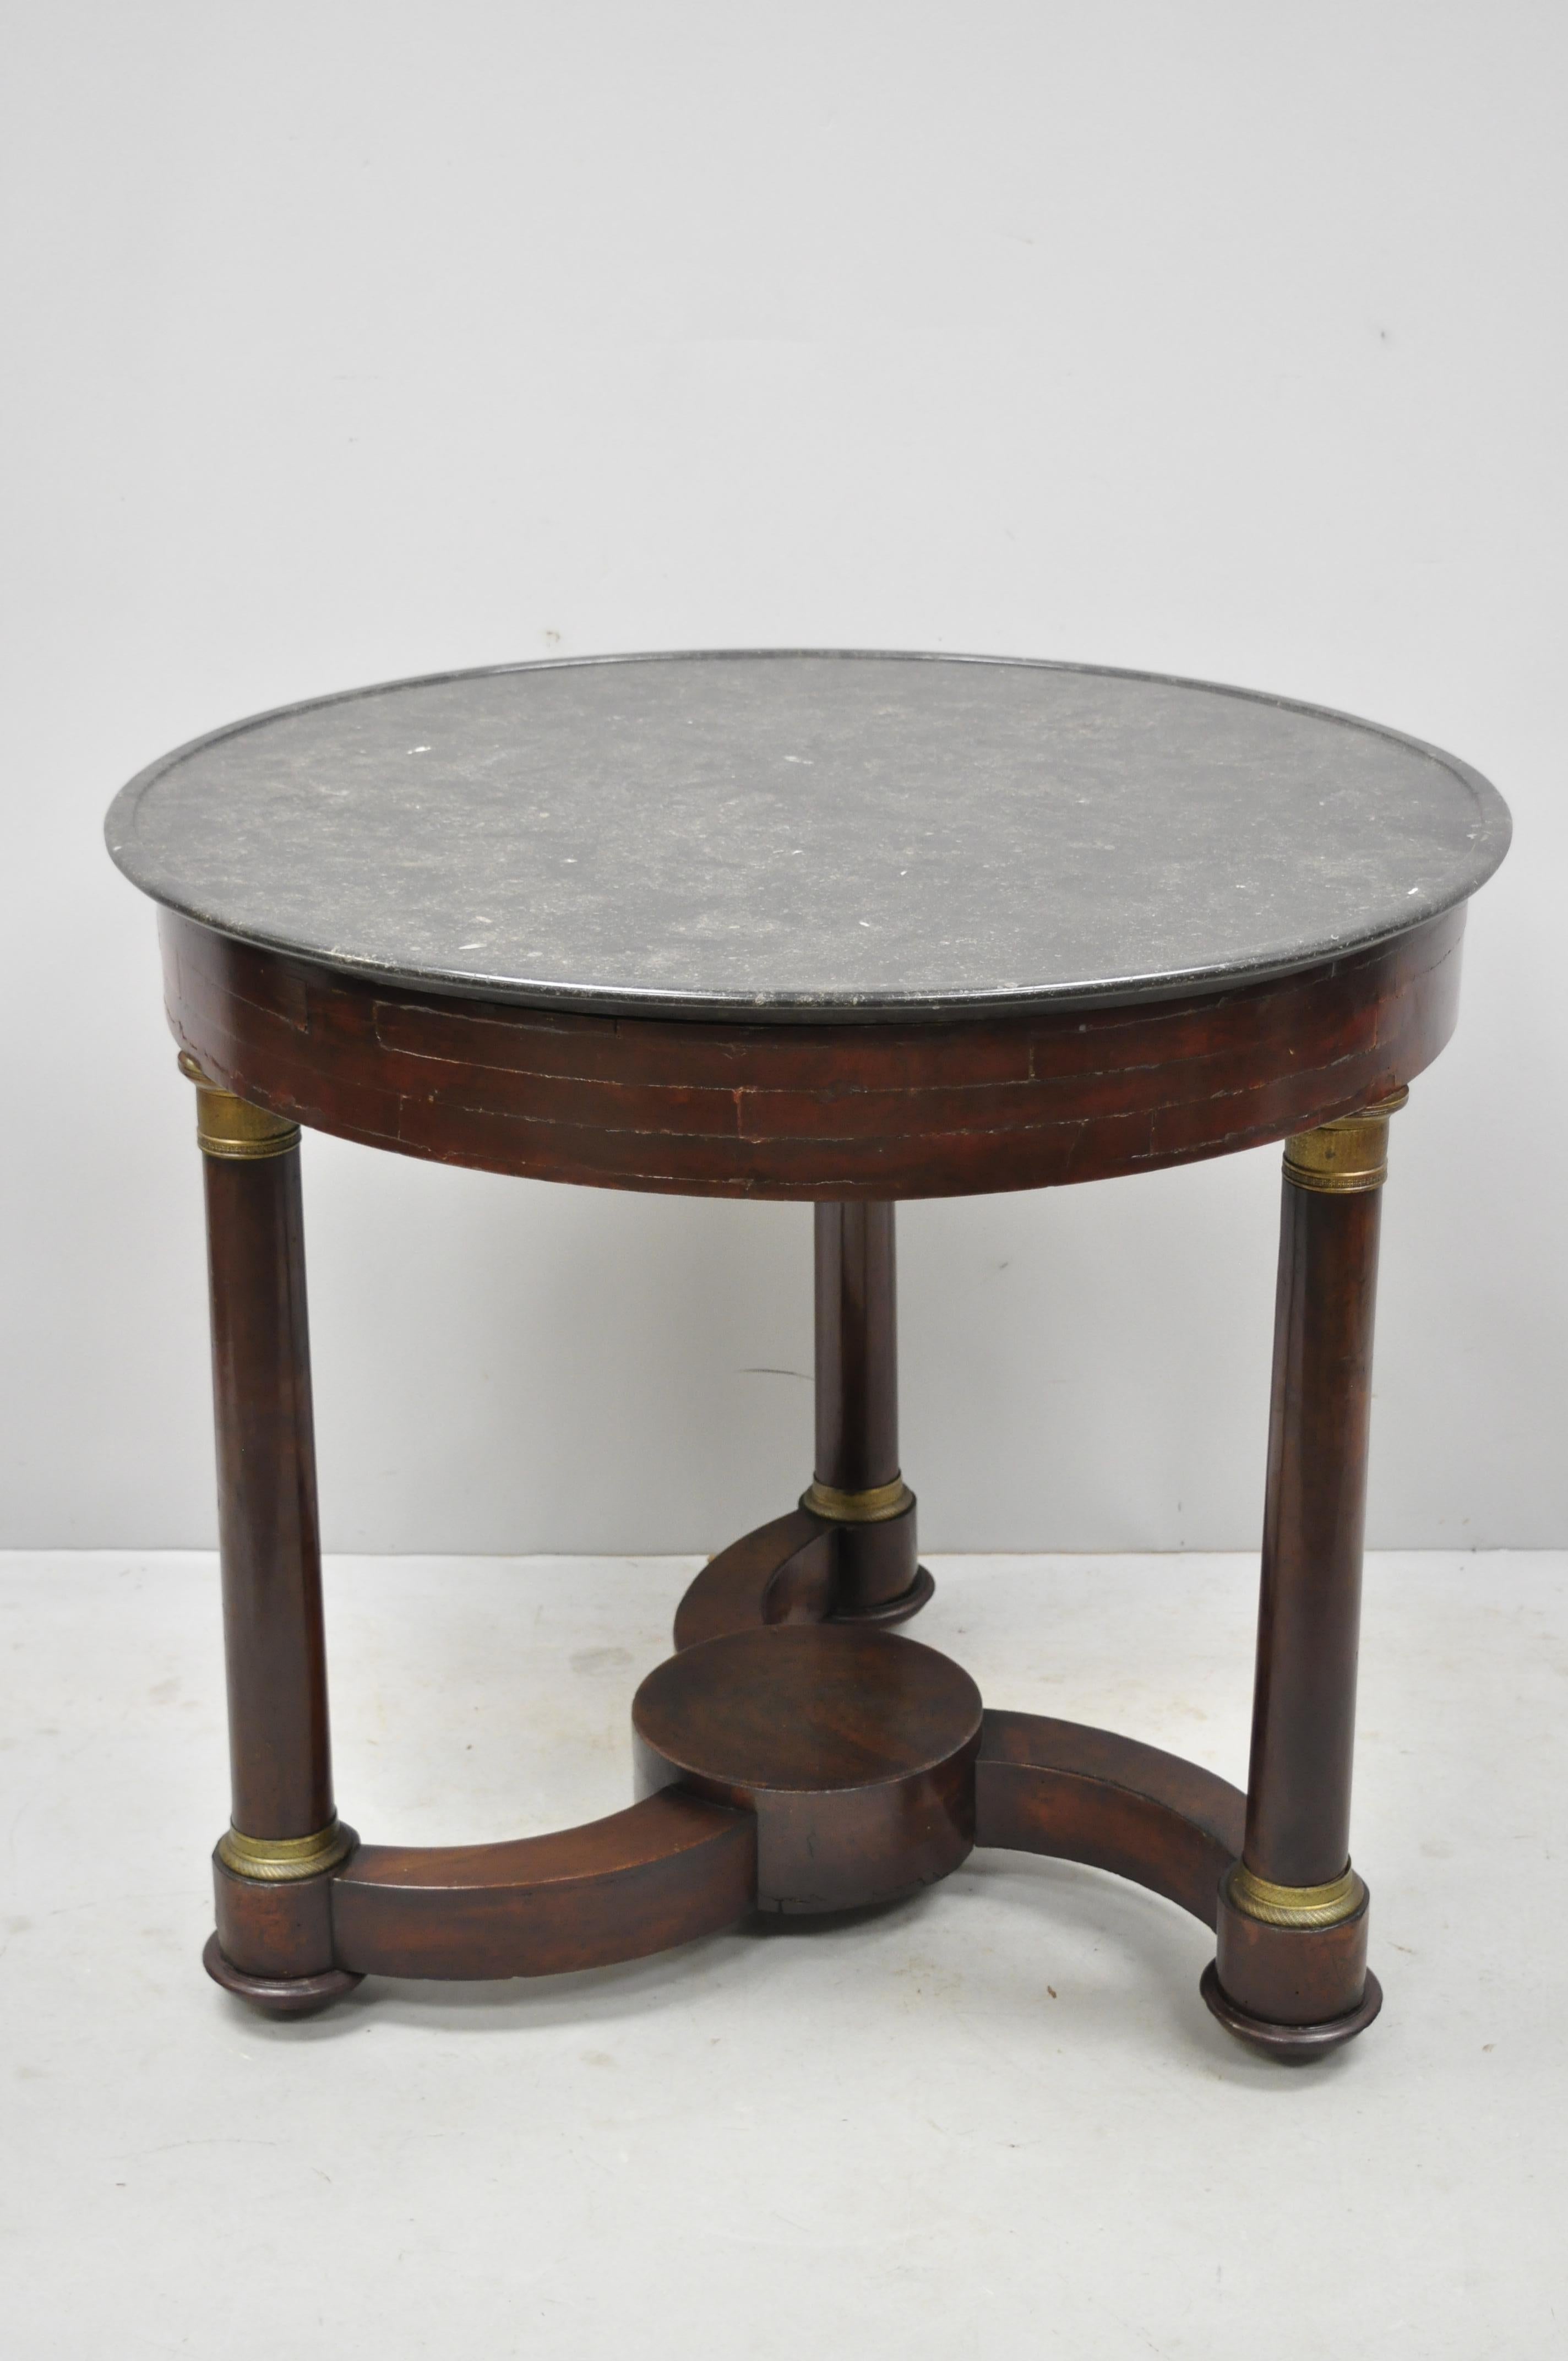 19th century French Empire mahogany round marble top center table with brass ormolu. Item features unique round marble 